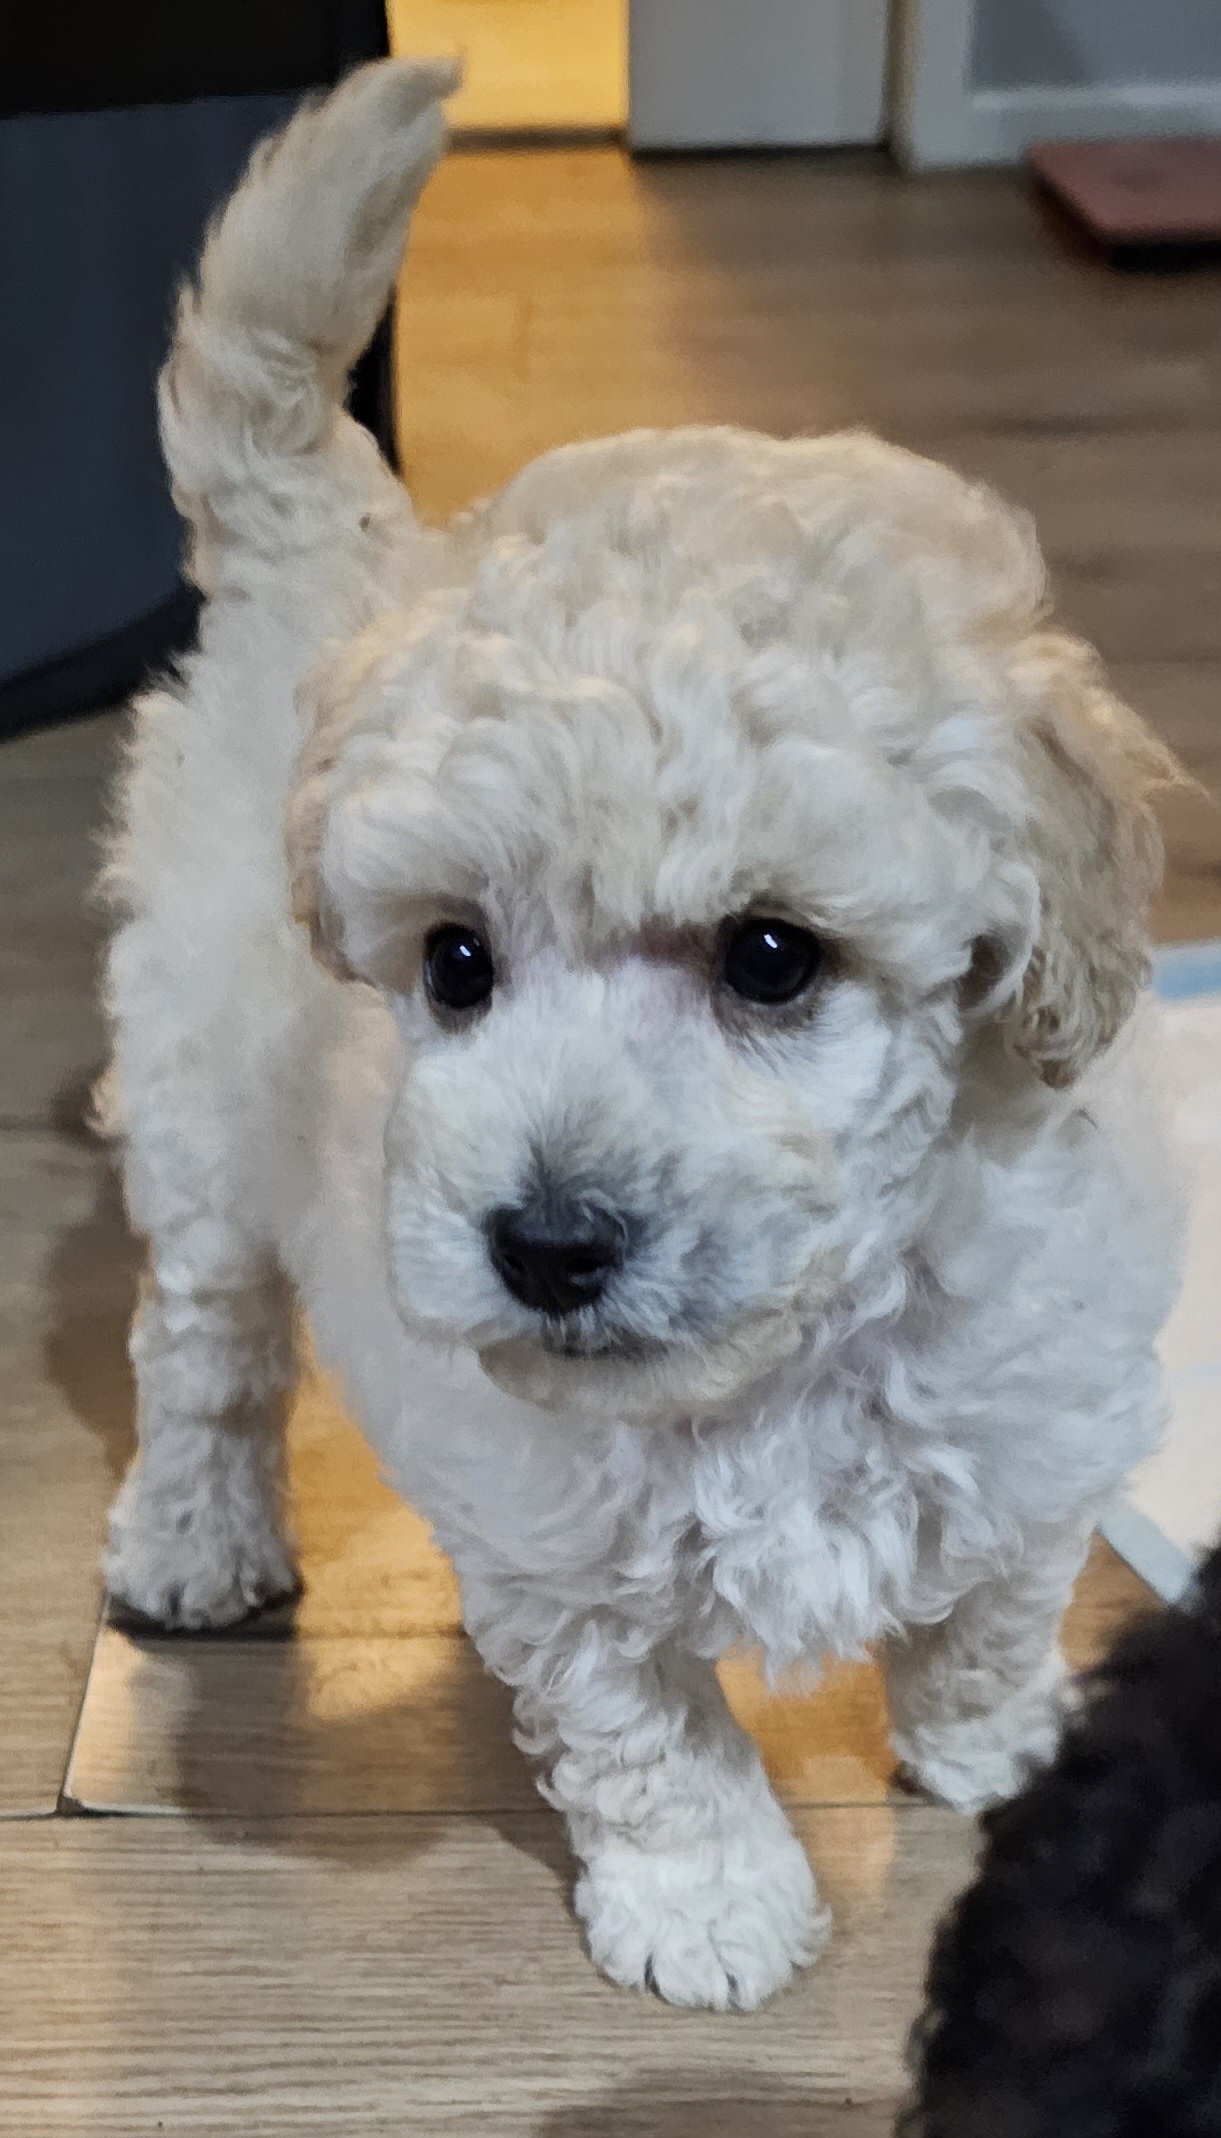 Toy Poodle Puppies - Adorable!!